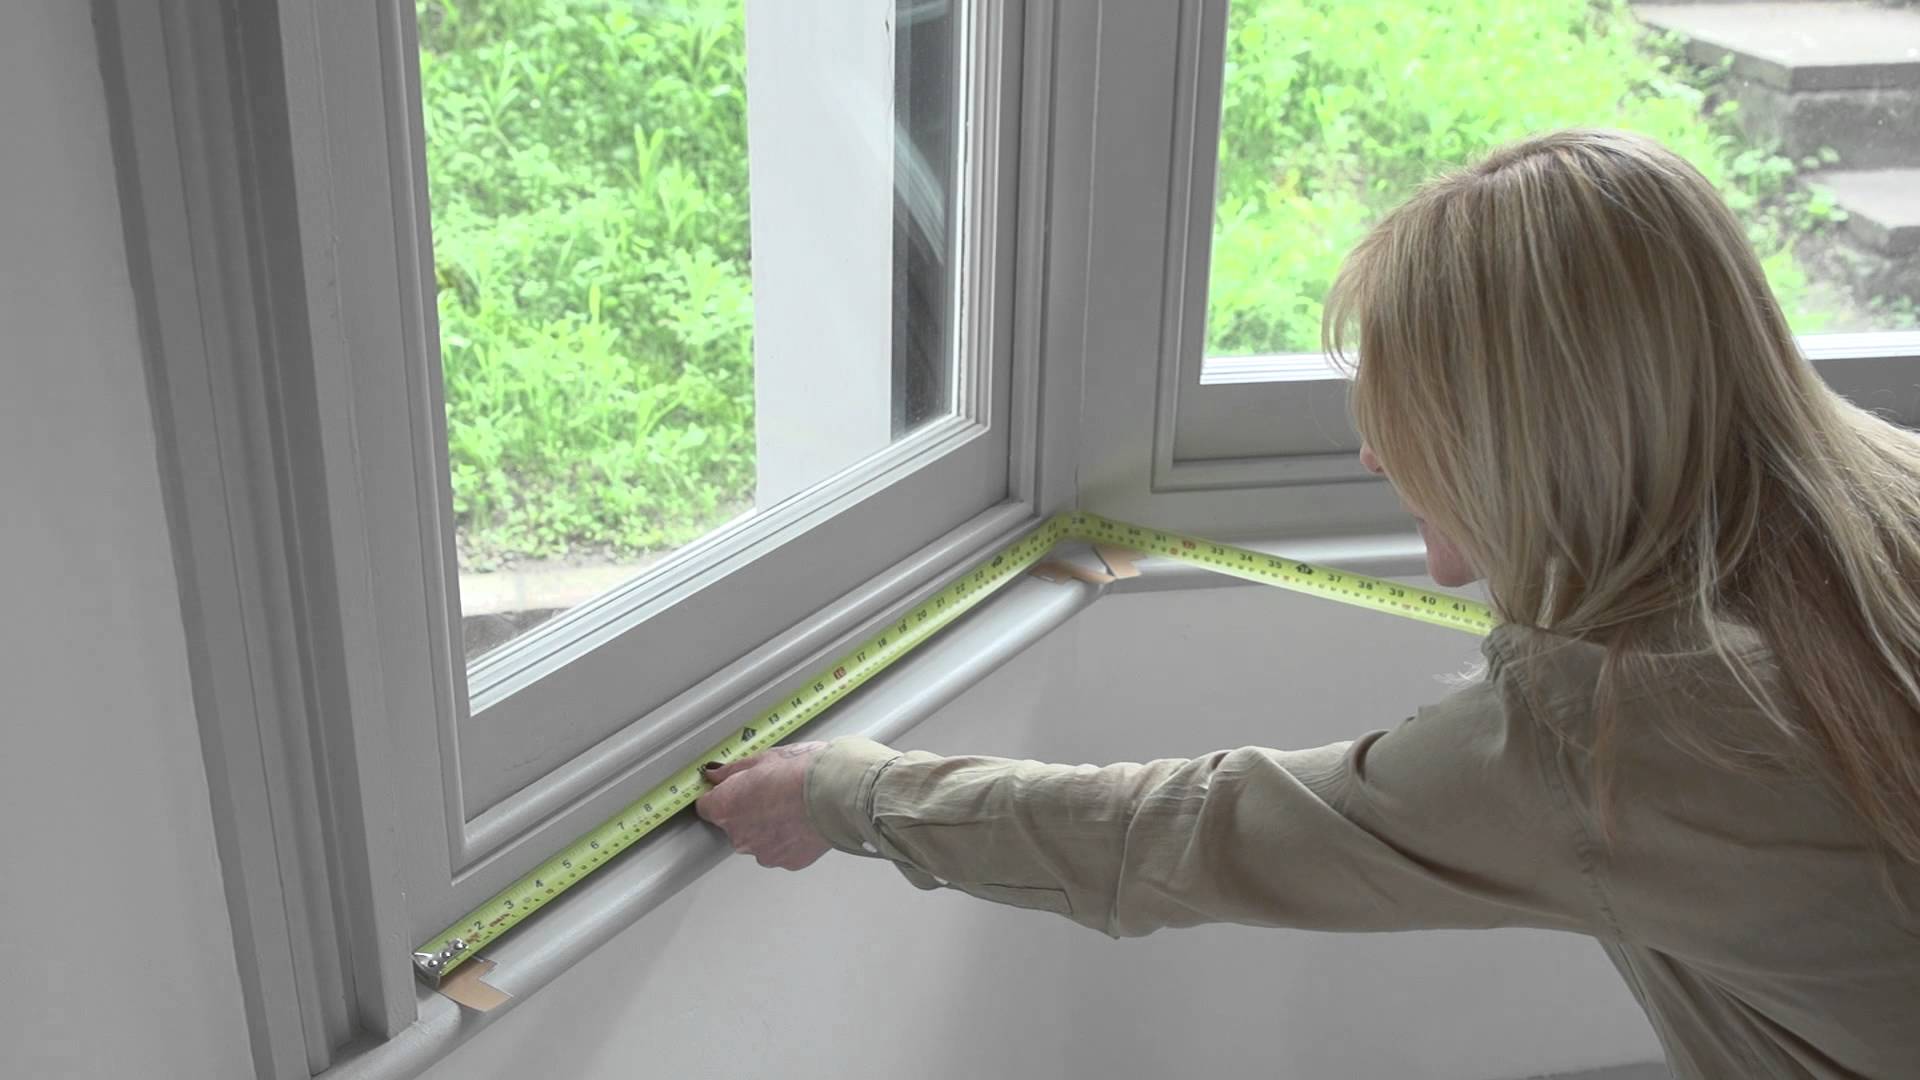 How to measure a bay window for new curtain hardware